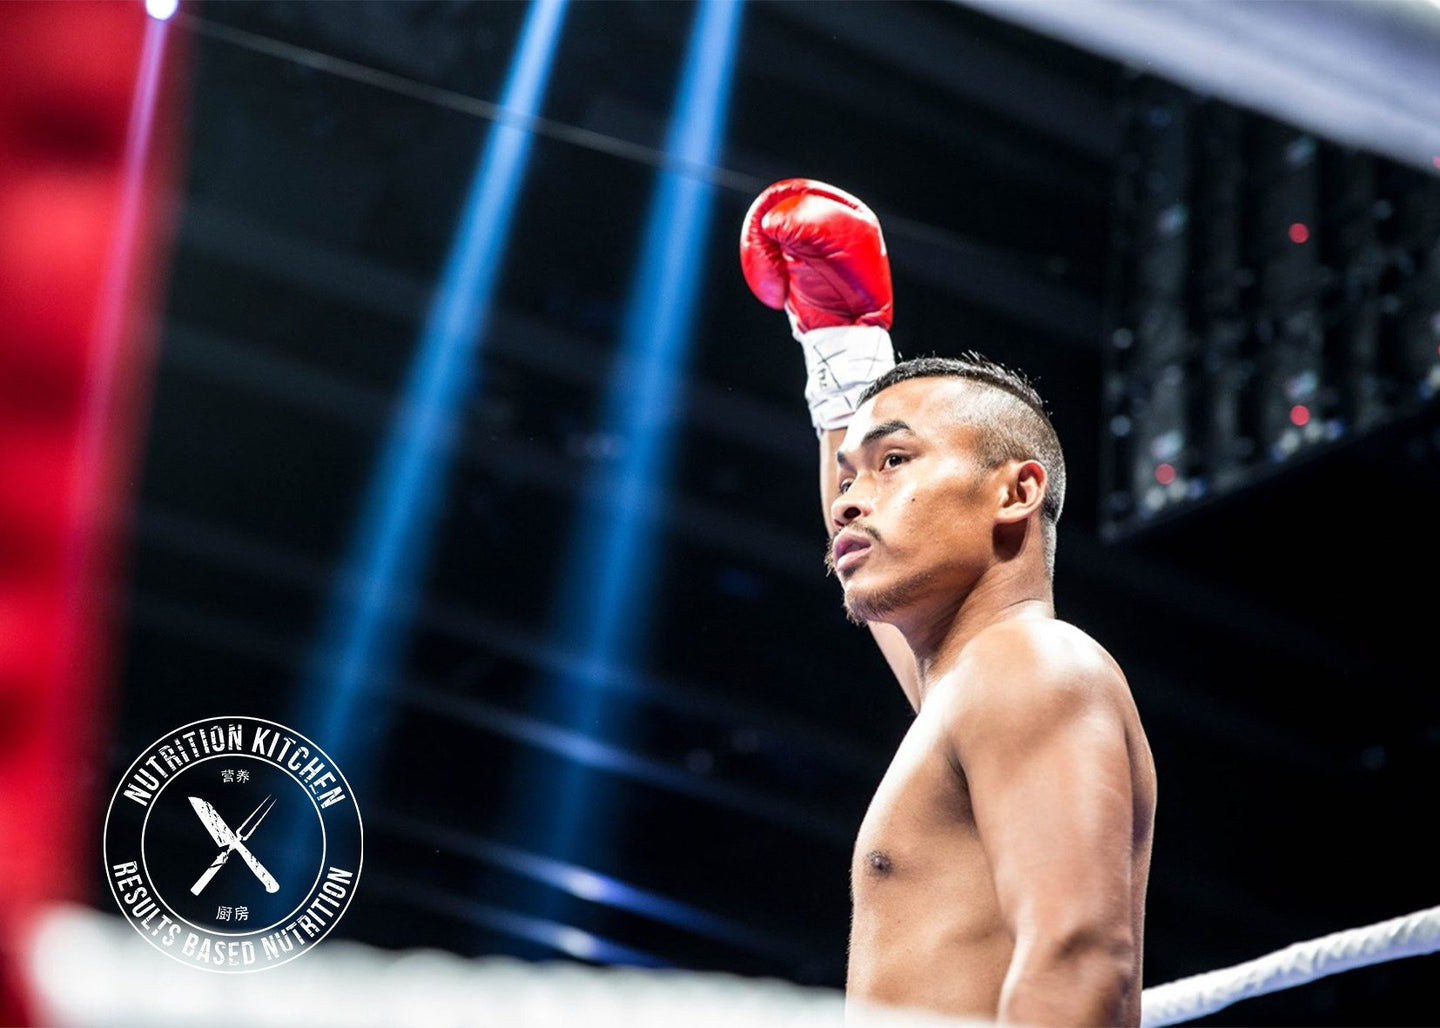 Boxing Champion Sures Gurung talks to Nutrition Kitchen